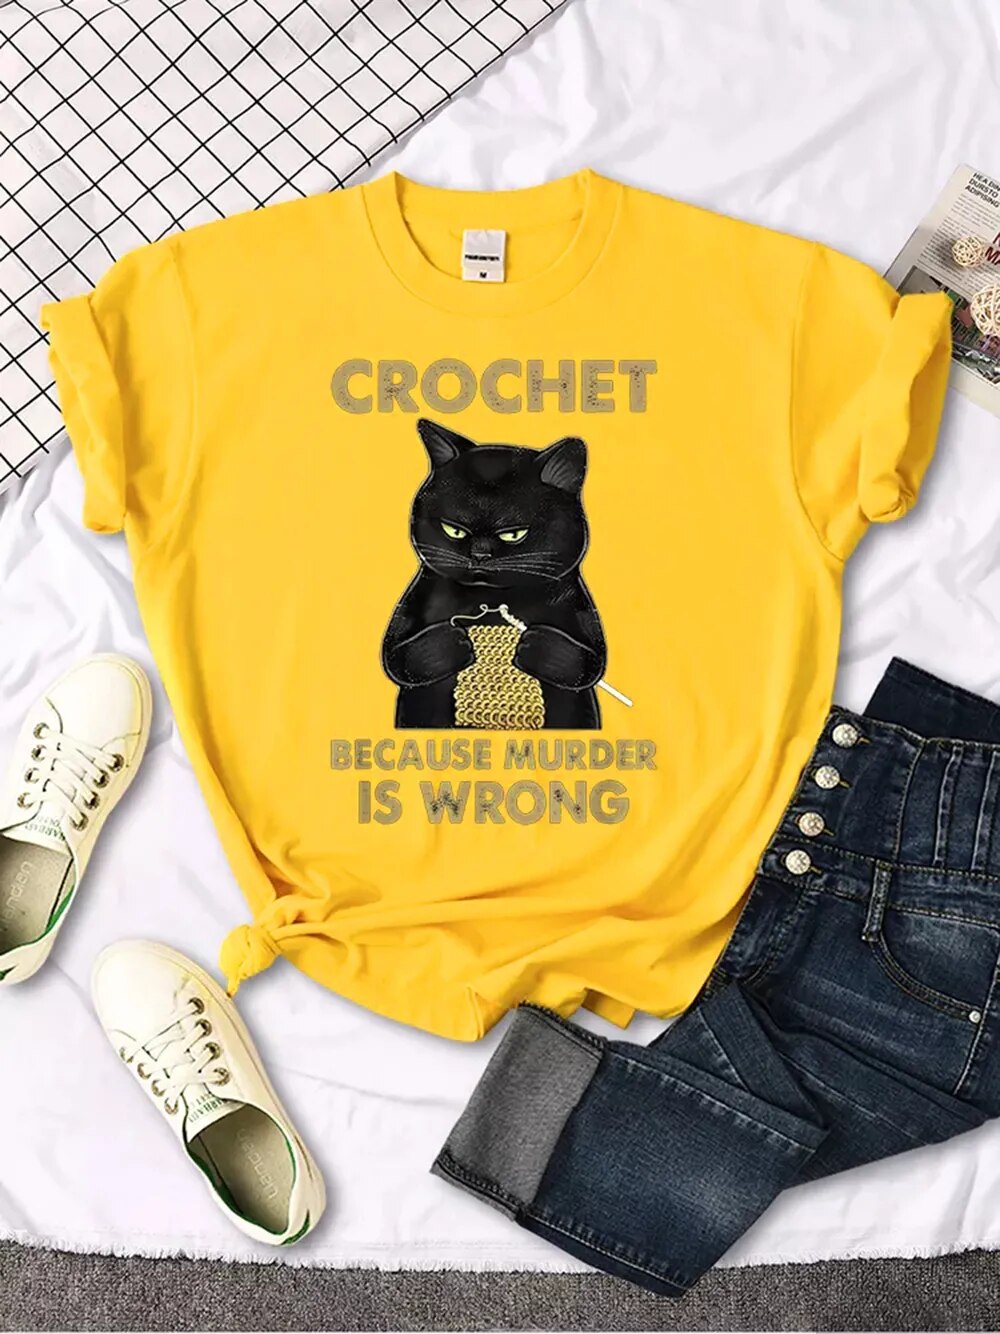 Whimsical Black Cat Shirt: A Playful Twist on Crochet with a witty Message - Nekoby Whimsical Black Cat Shirt: A Playful Twist on Crochet with a witty Message Yellow||14 / Asian XL||5